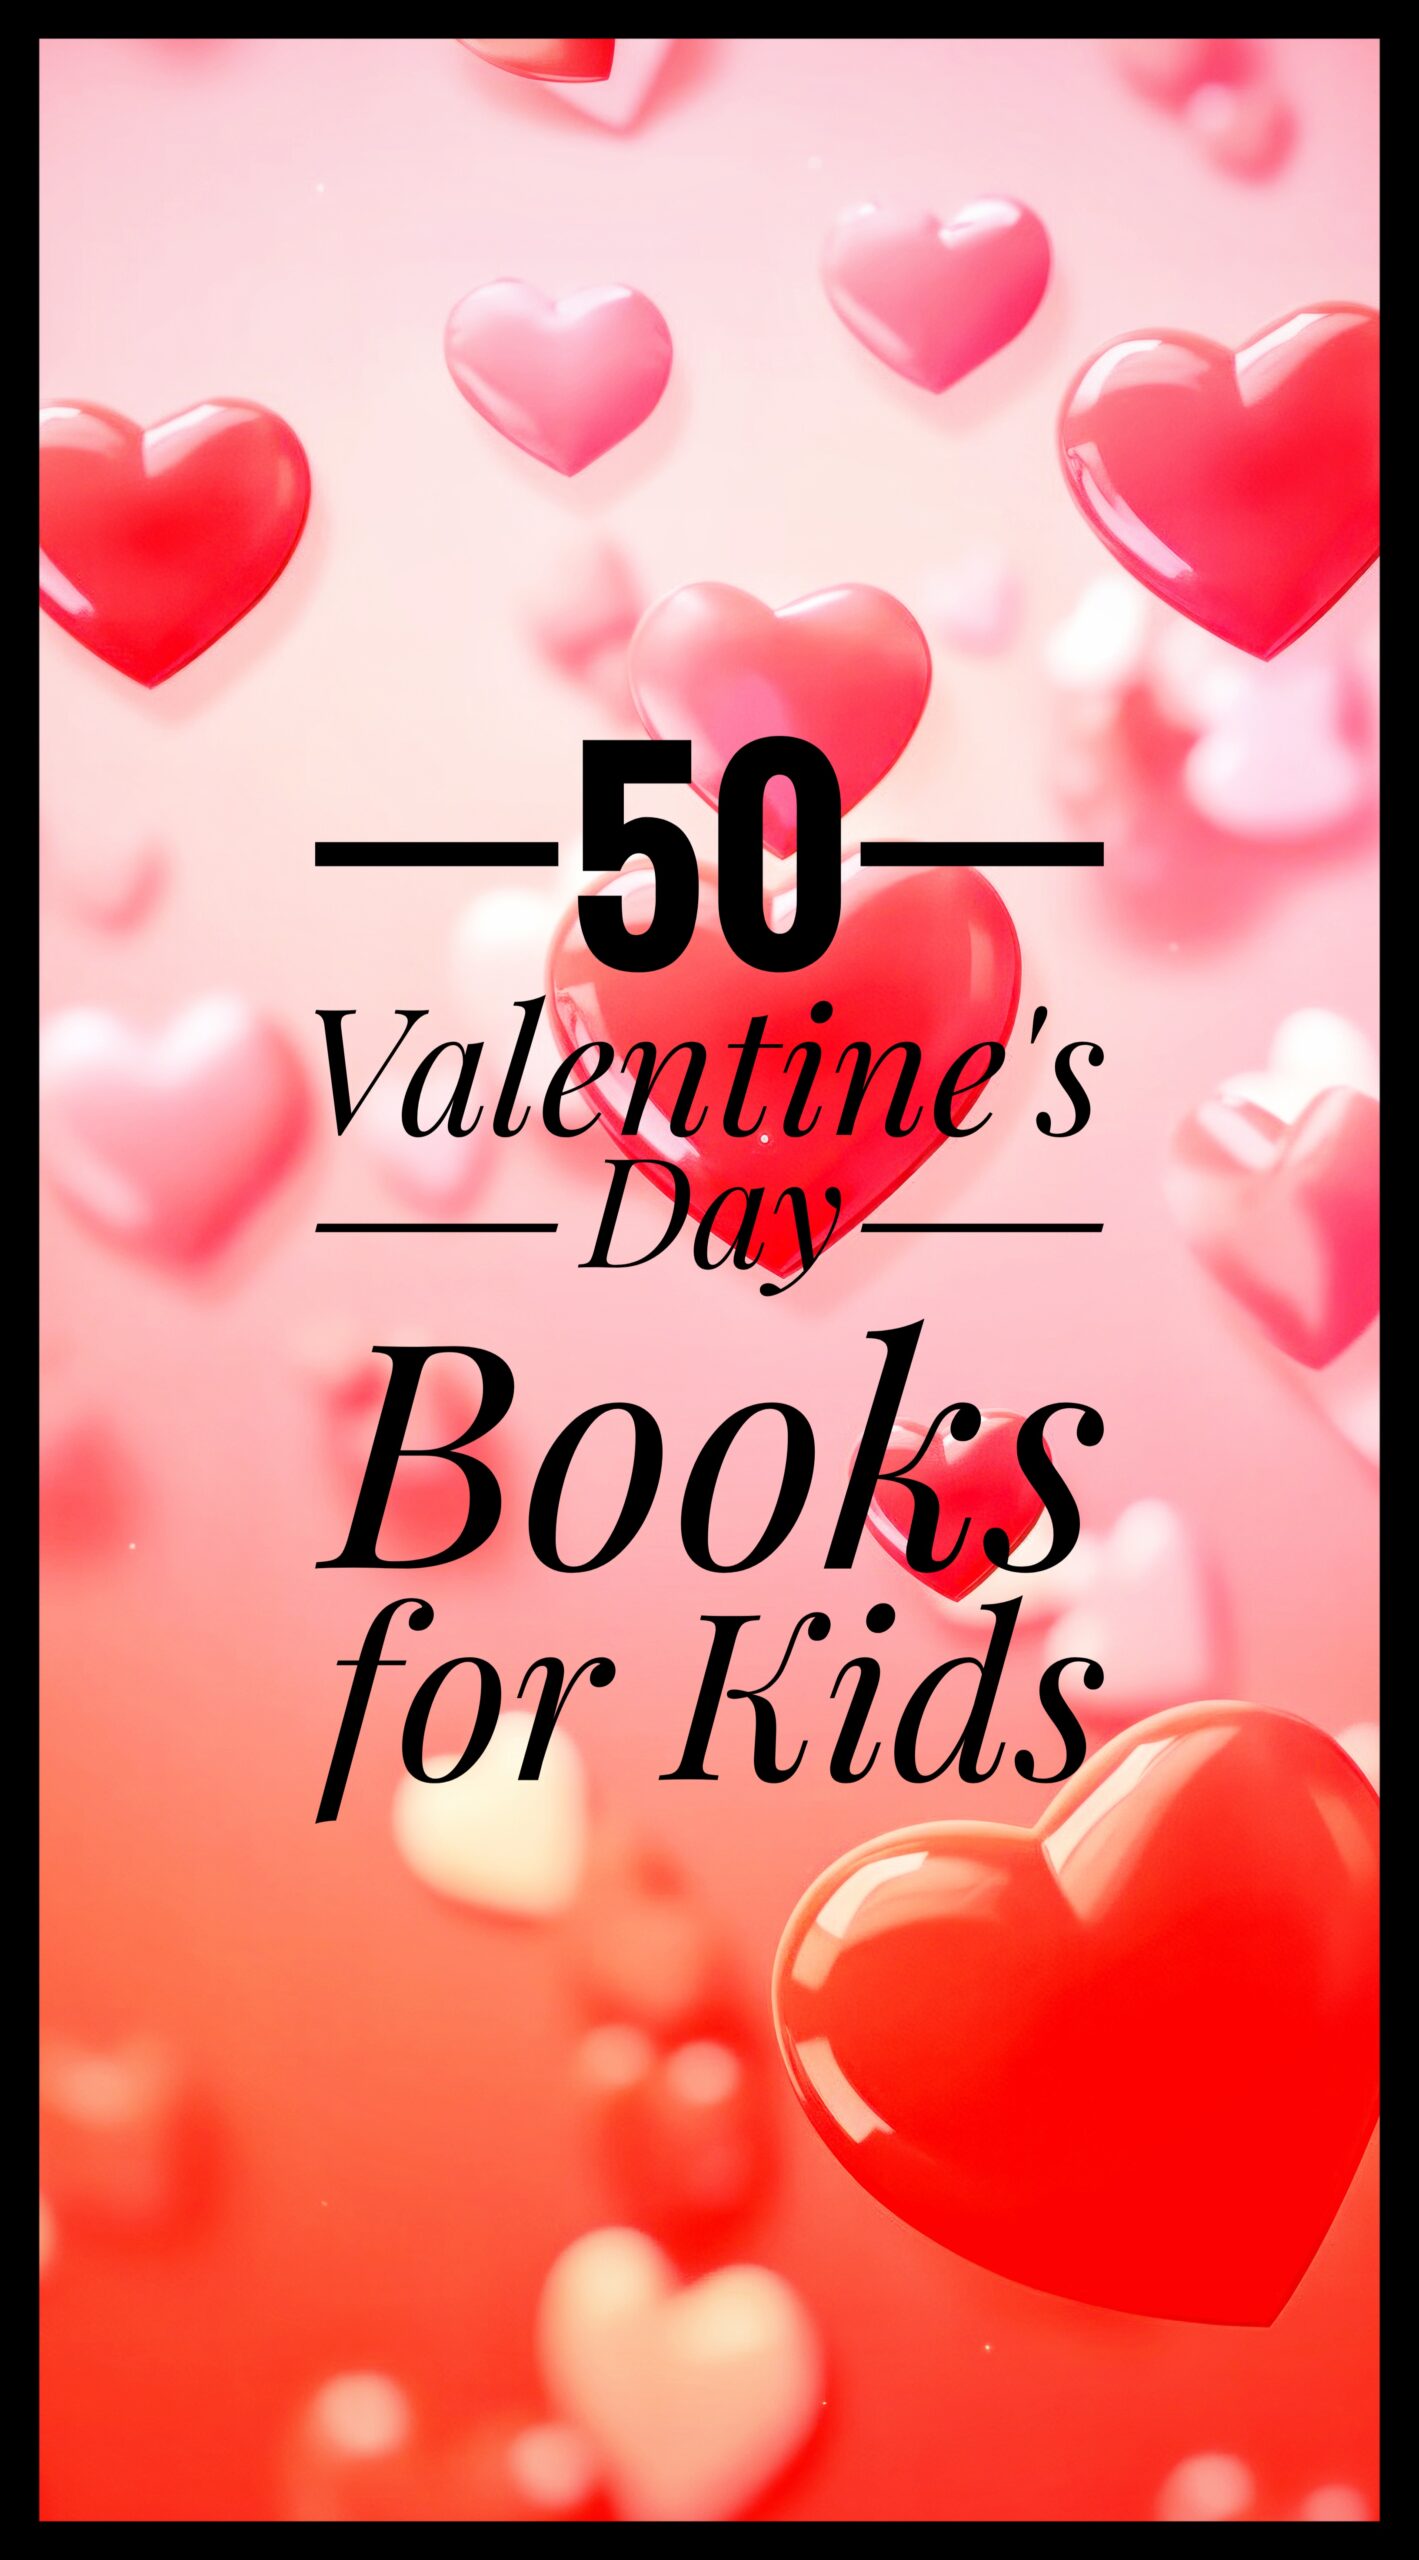 50 Valentines Day Books for Kids